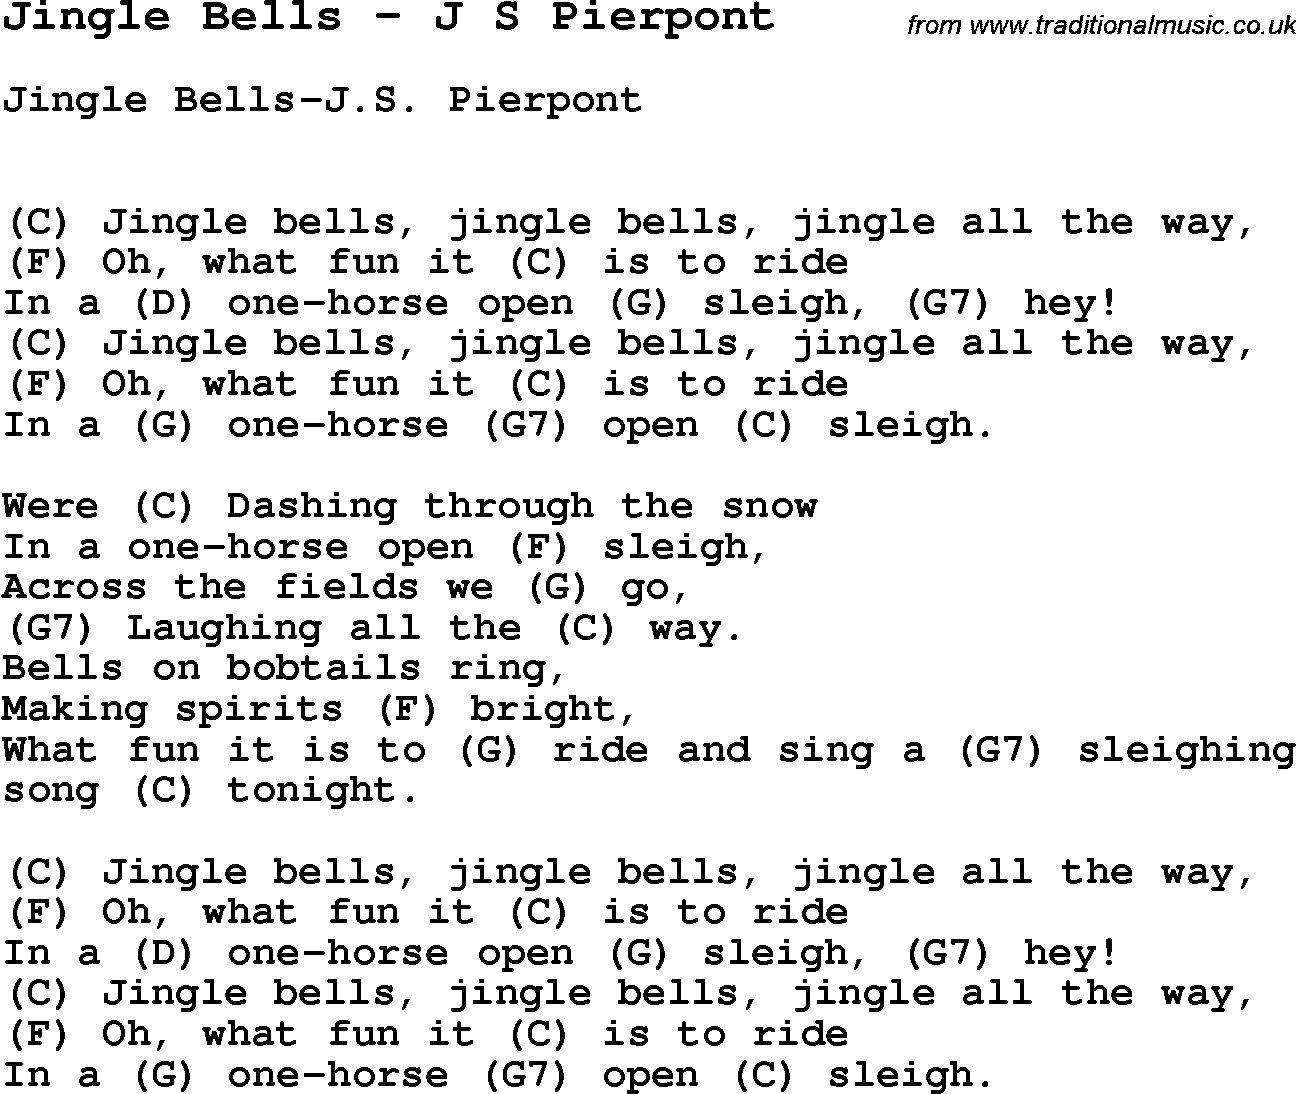 Song Jingle Bells by J S Pierpont, with lyrics for vocal performance and accompaniment chords for Ukulele, Guitar Banjo etc.